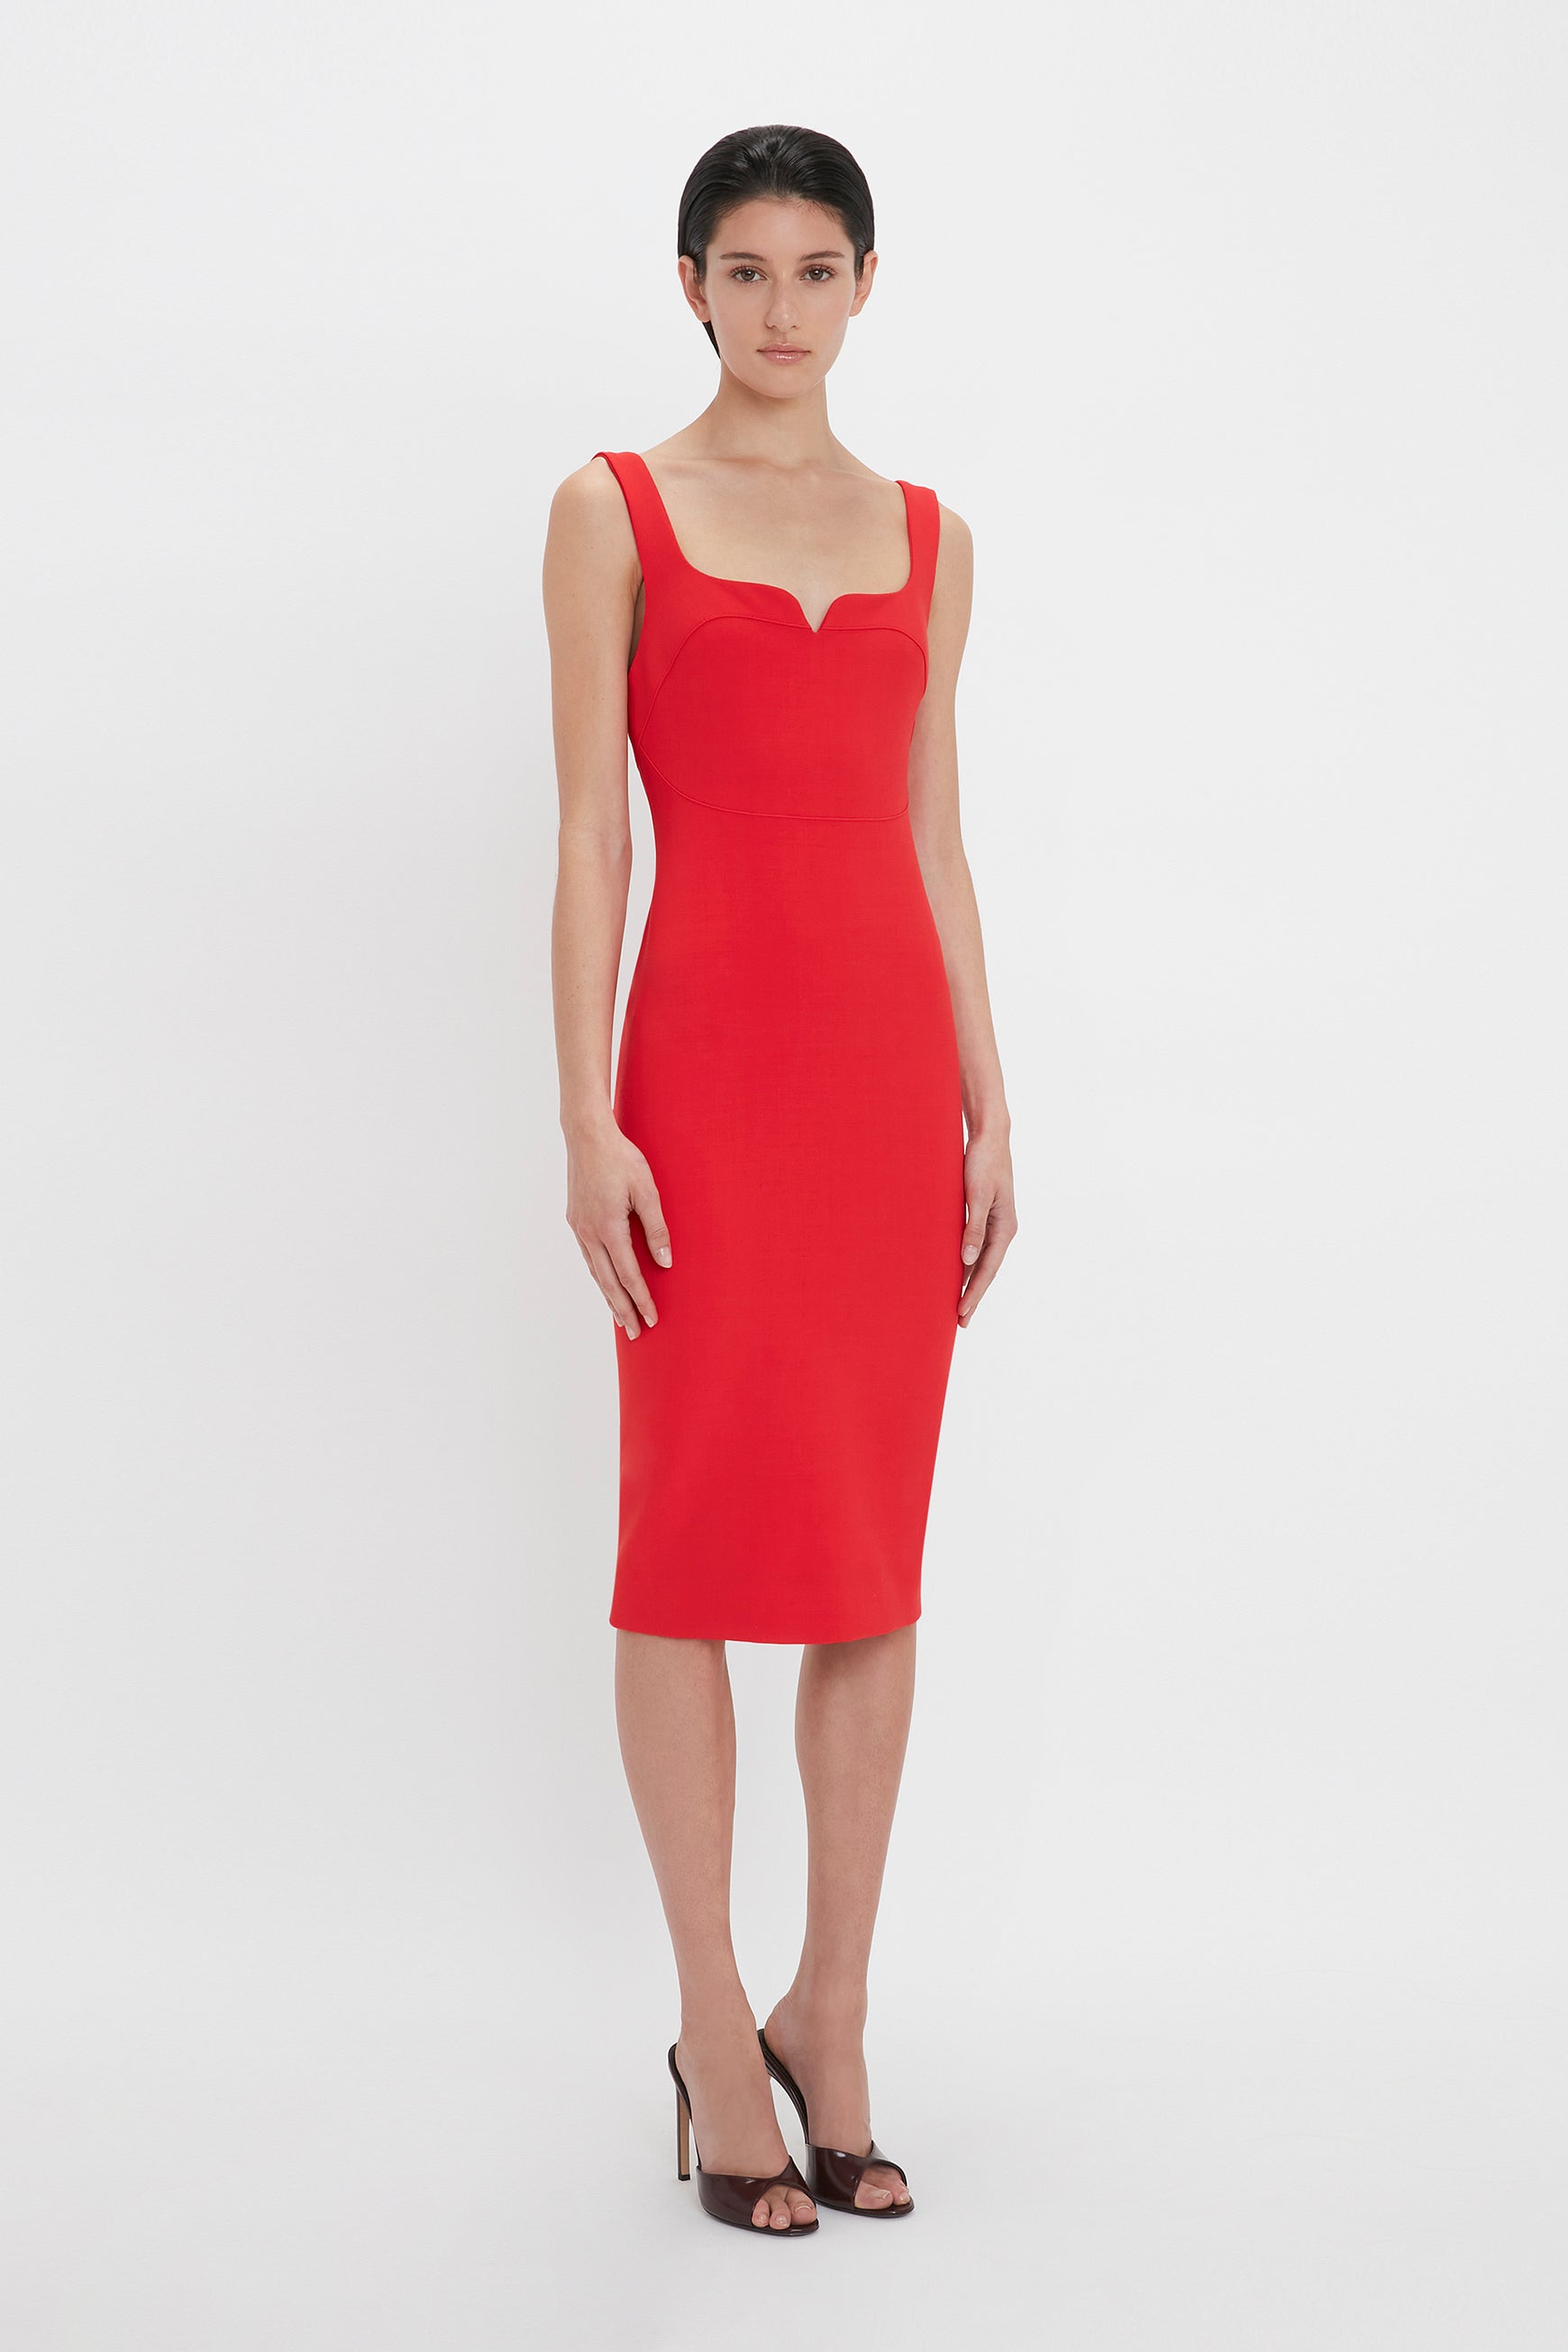 A person stands against a white background wearing a Sleeveless Fitted T-Shirt Dress In Bright Red by Victoria Beckham and black high heels.